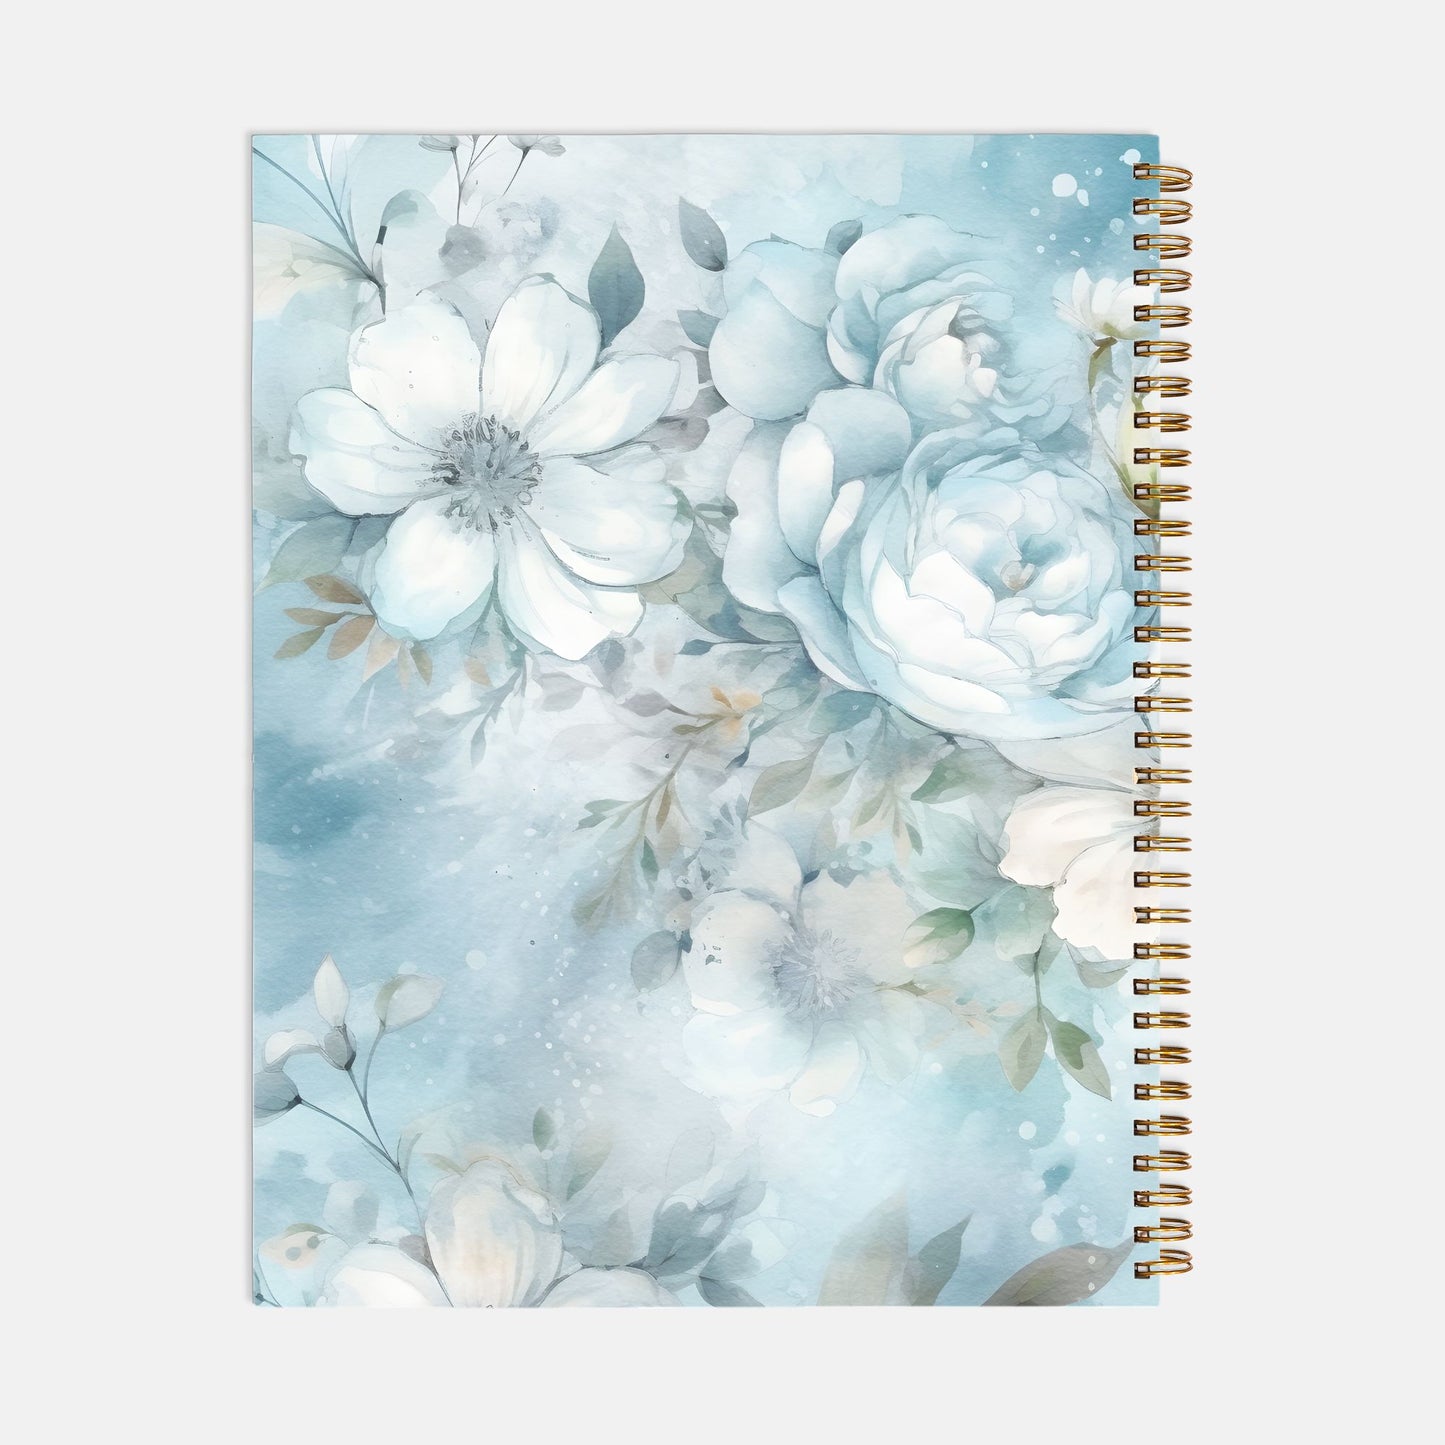 Notebook Softcover Spiral 8.5 x 11 - Boss Lady Classy 03